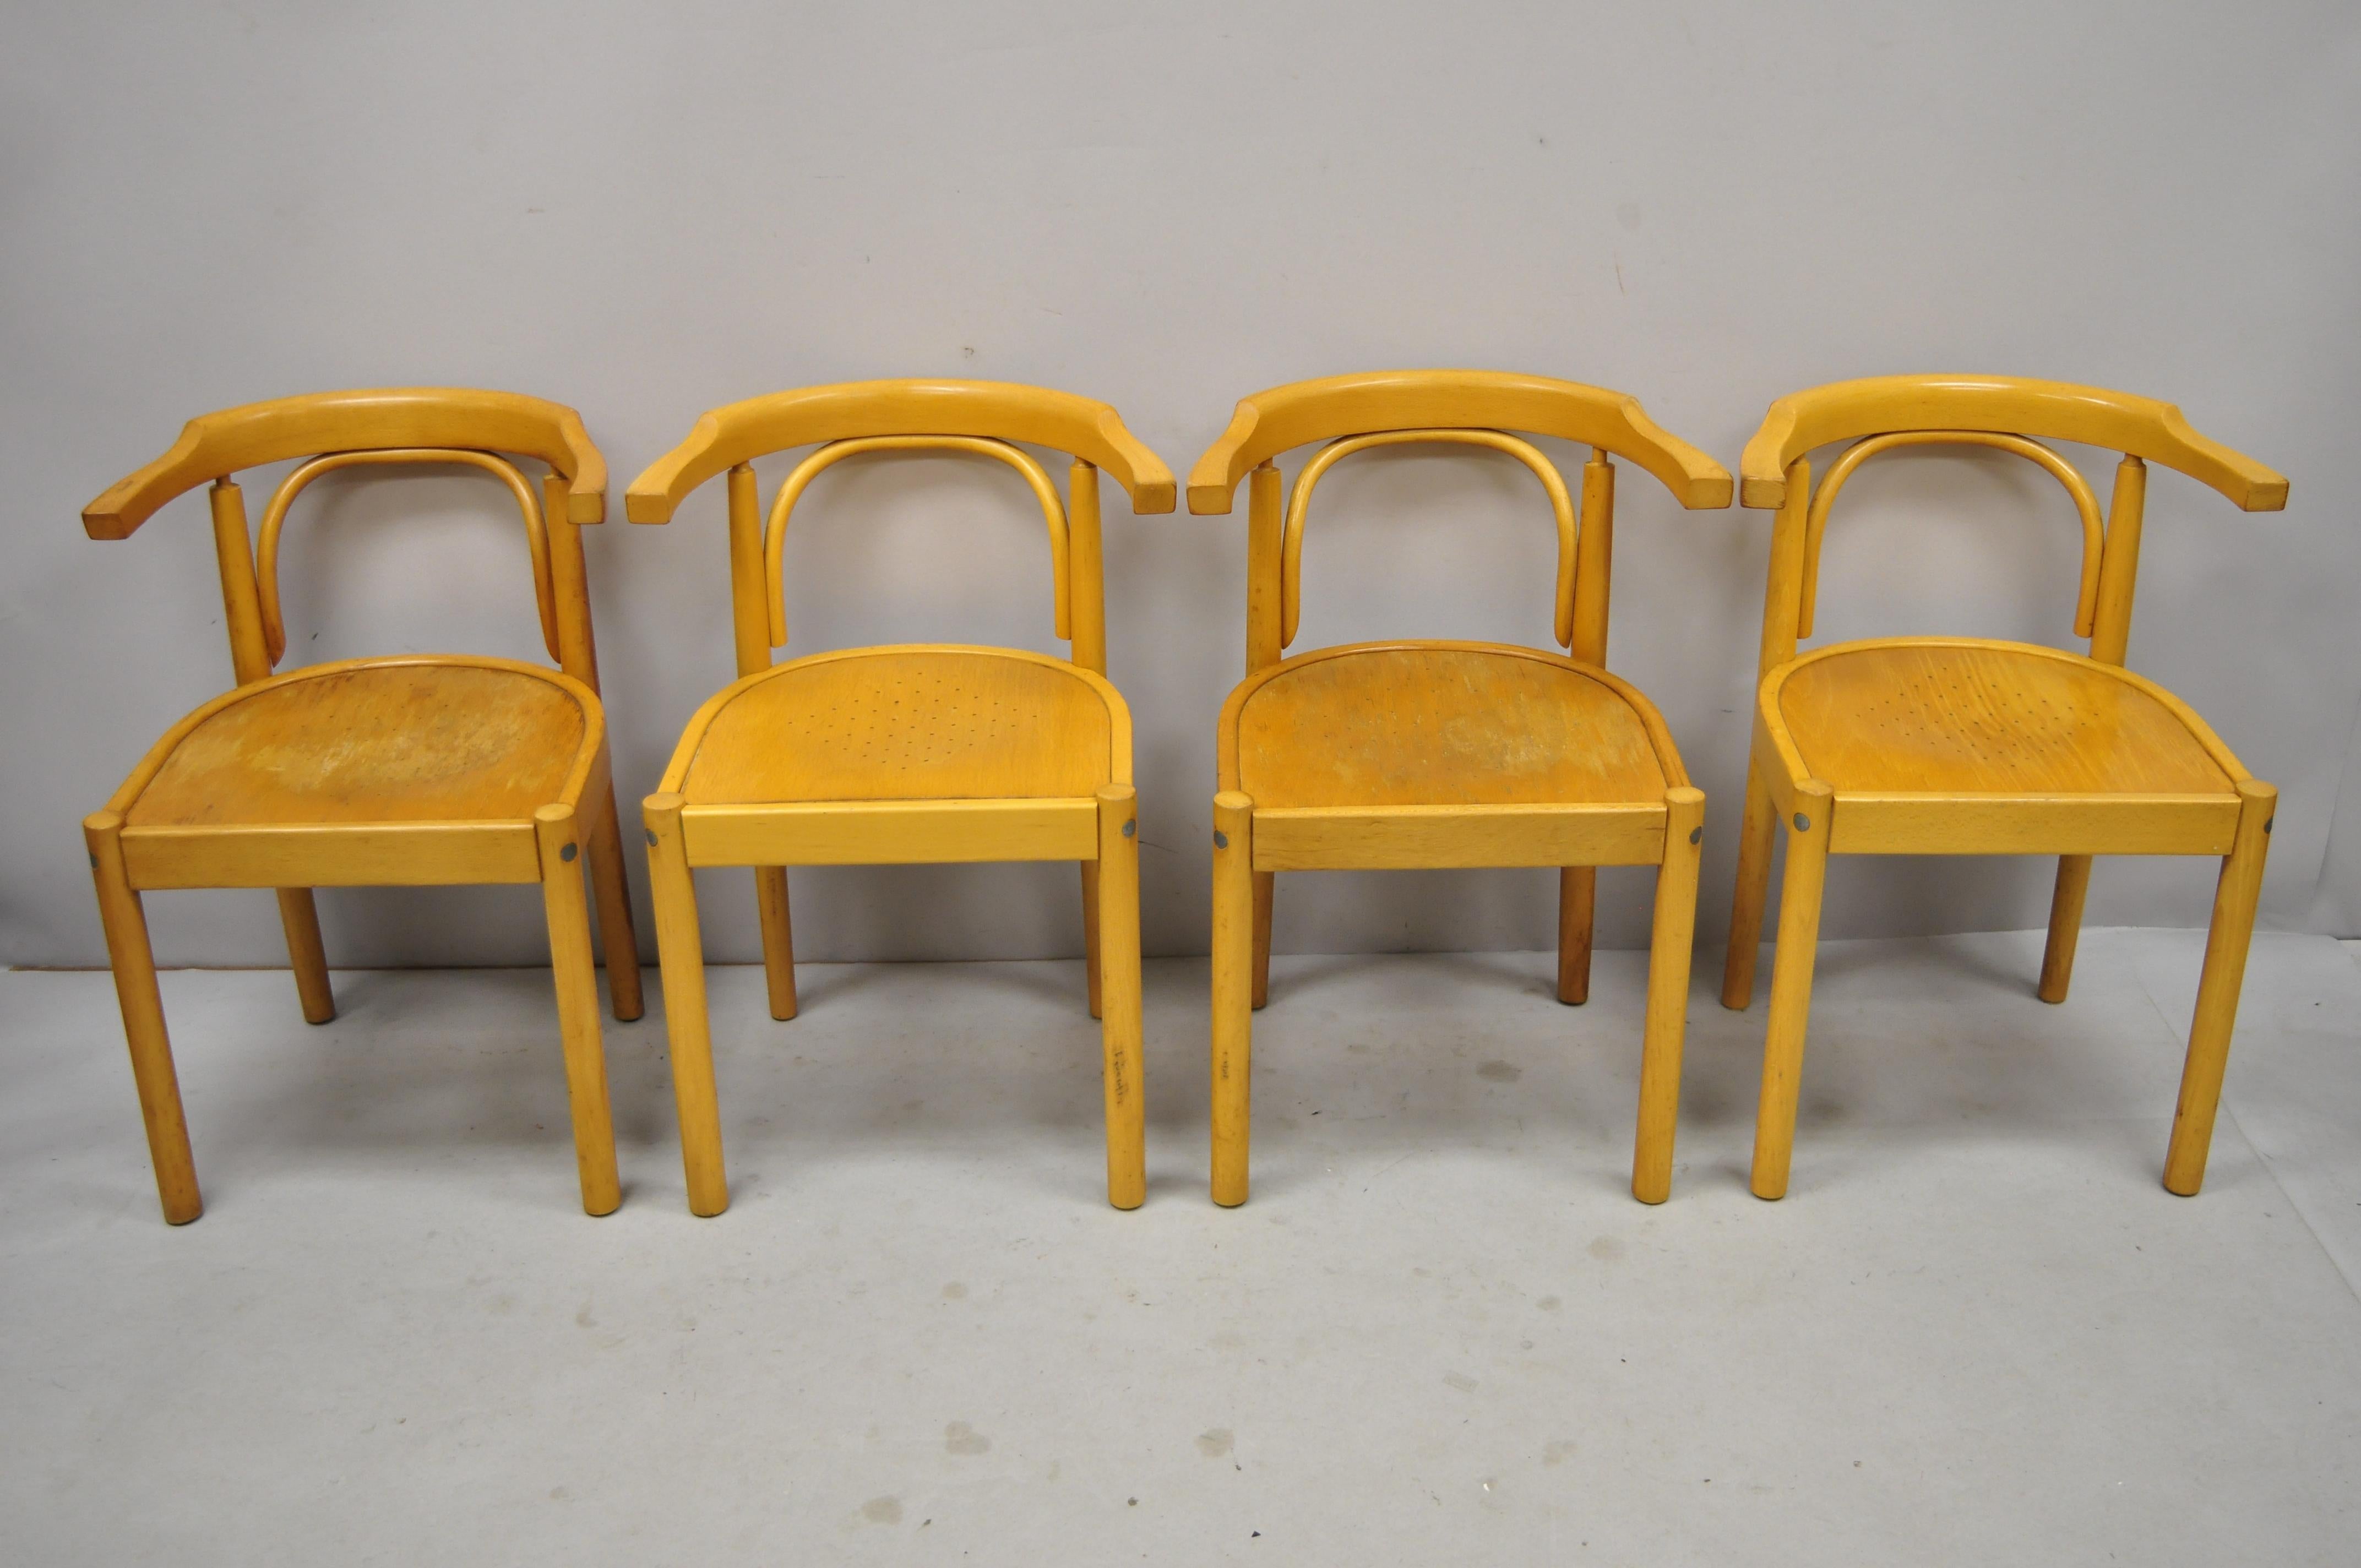 6 vintage Bentwood Thonet style Parlor dining cafe bistro chairs. Listing includes barrel back bentwood frames, perforated seats, very nice vintage item, great style and form, circa mid-20th century. Measurements: 28